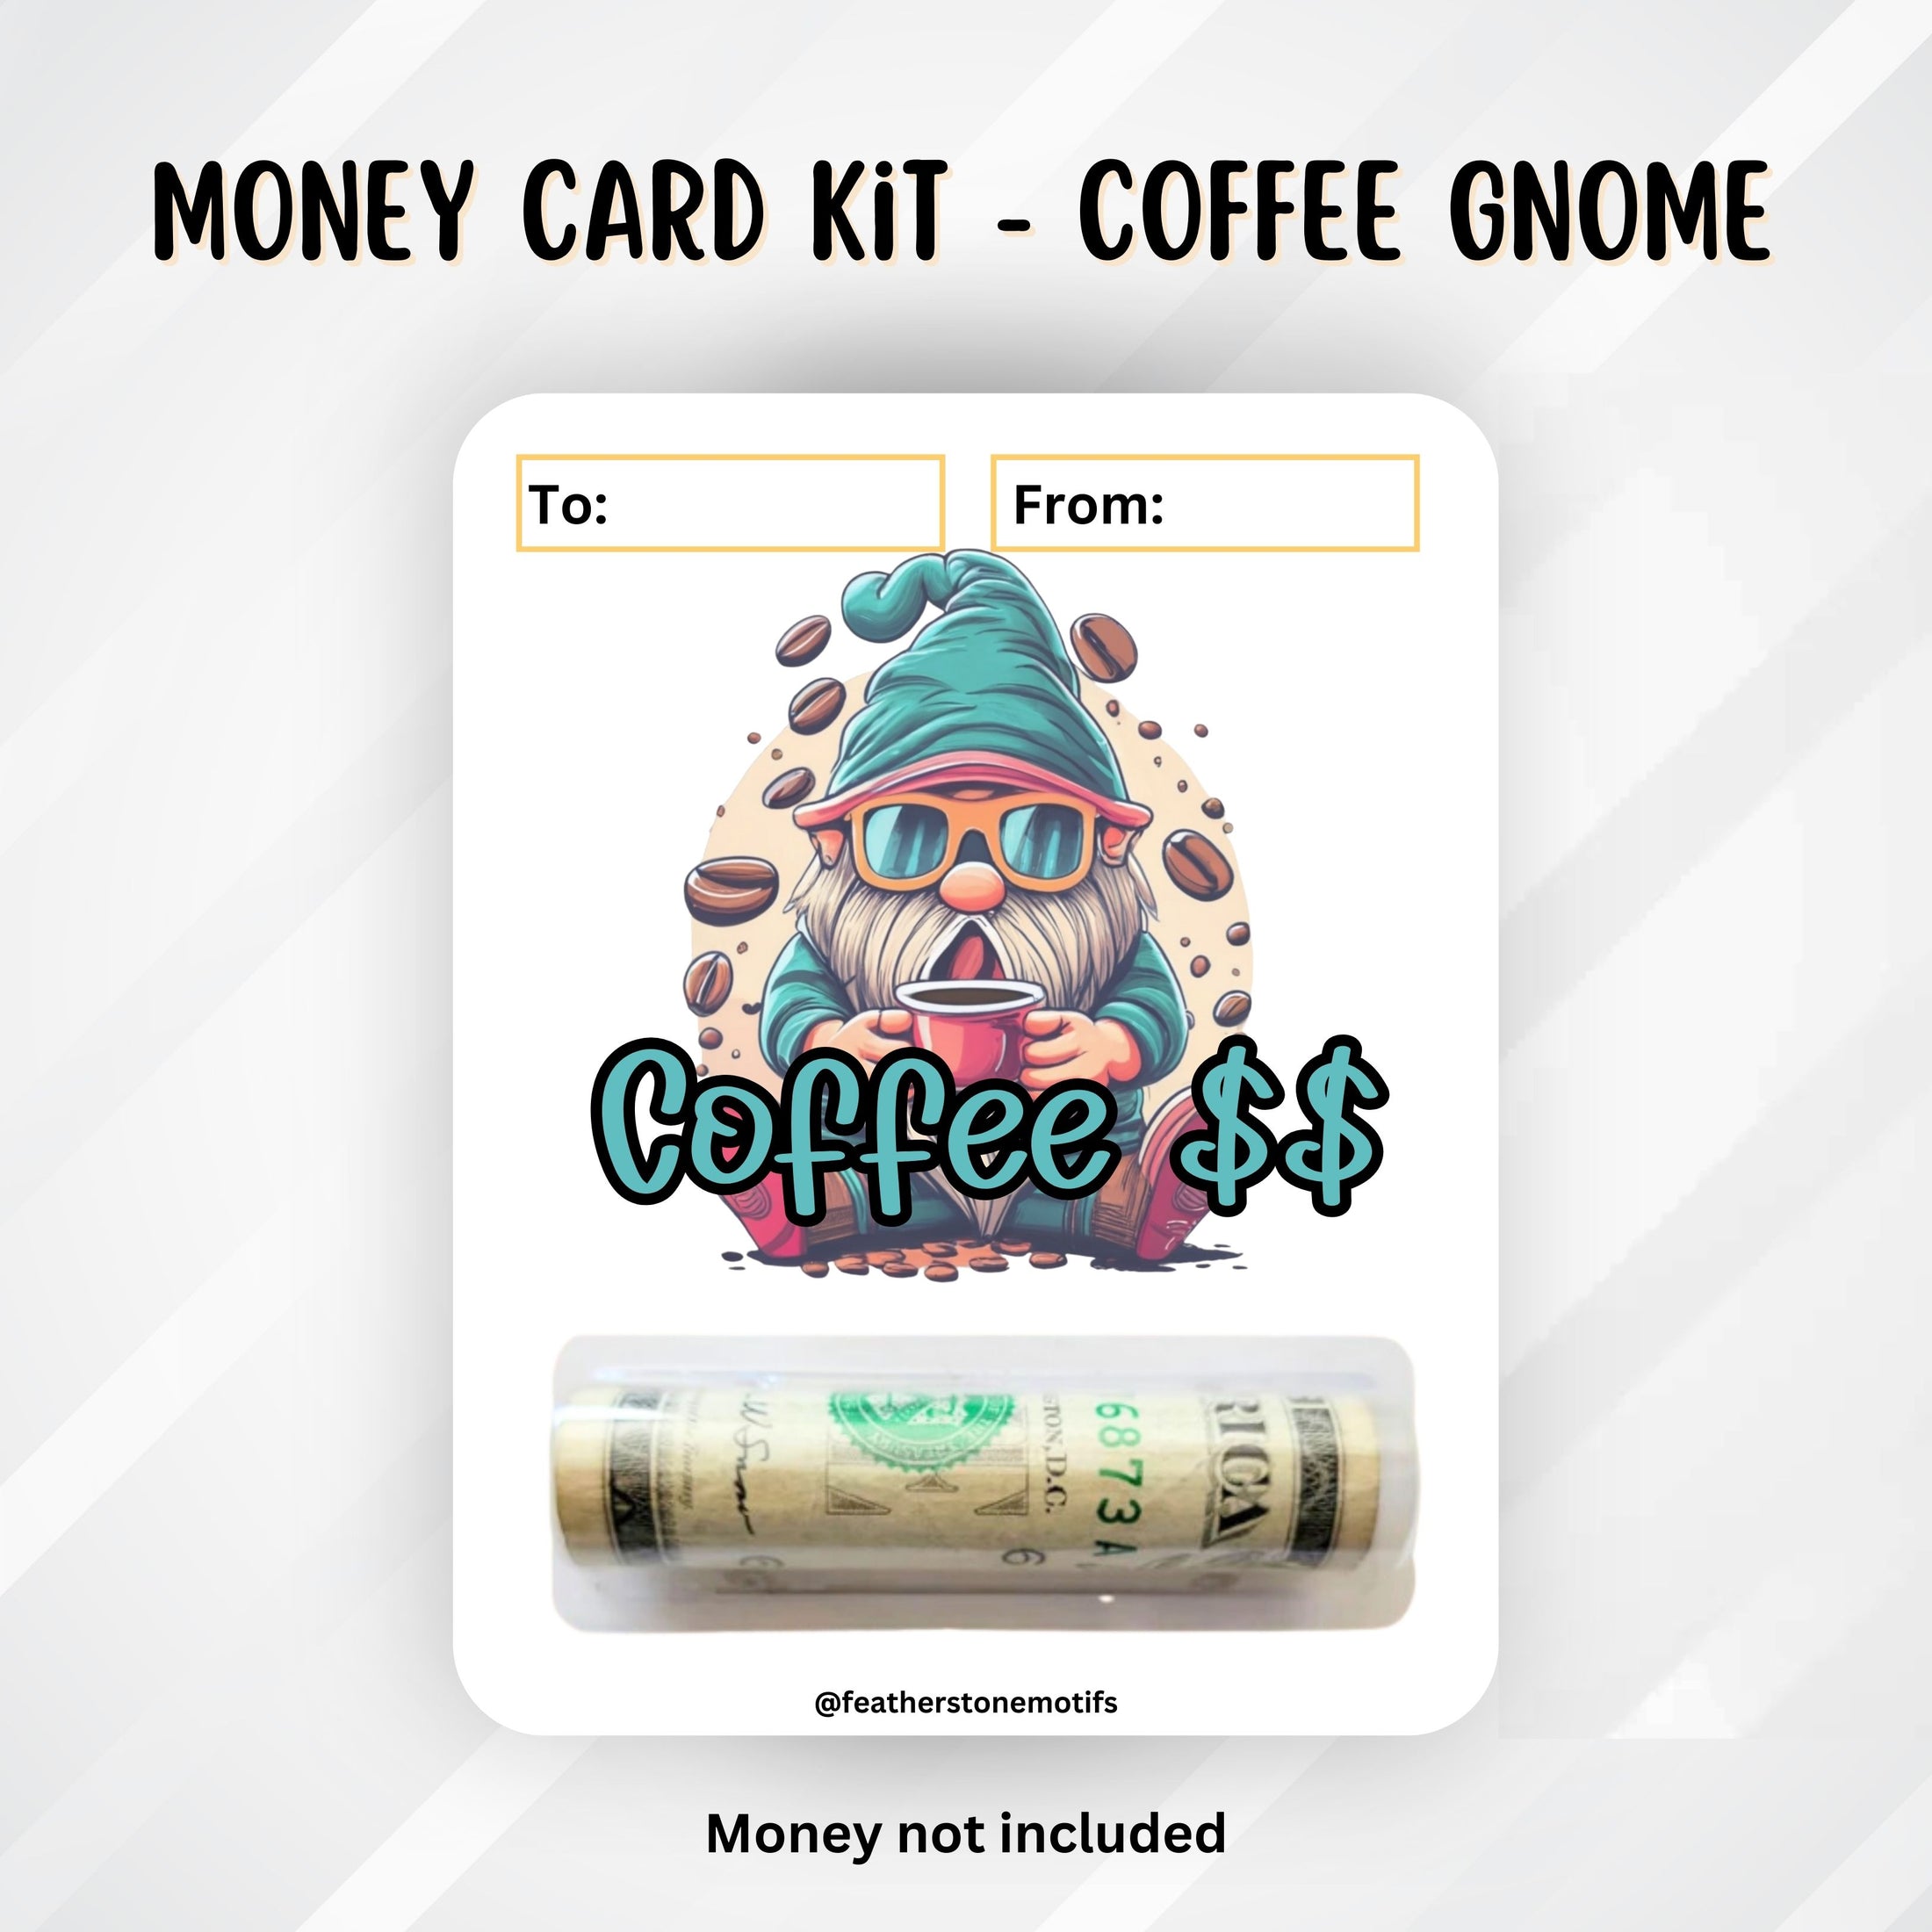 This image shows the money tube attached to the Coffee Gnome Money Card.